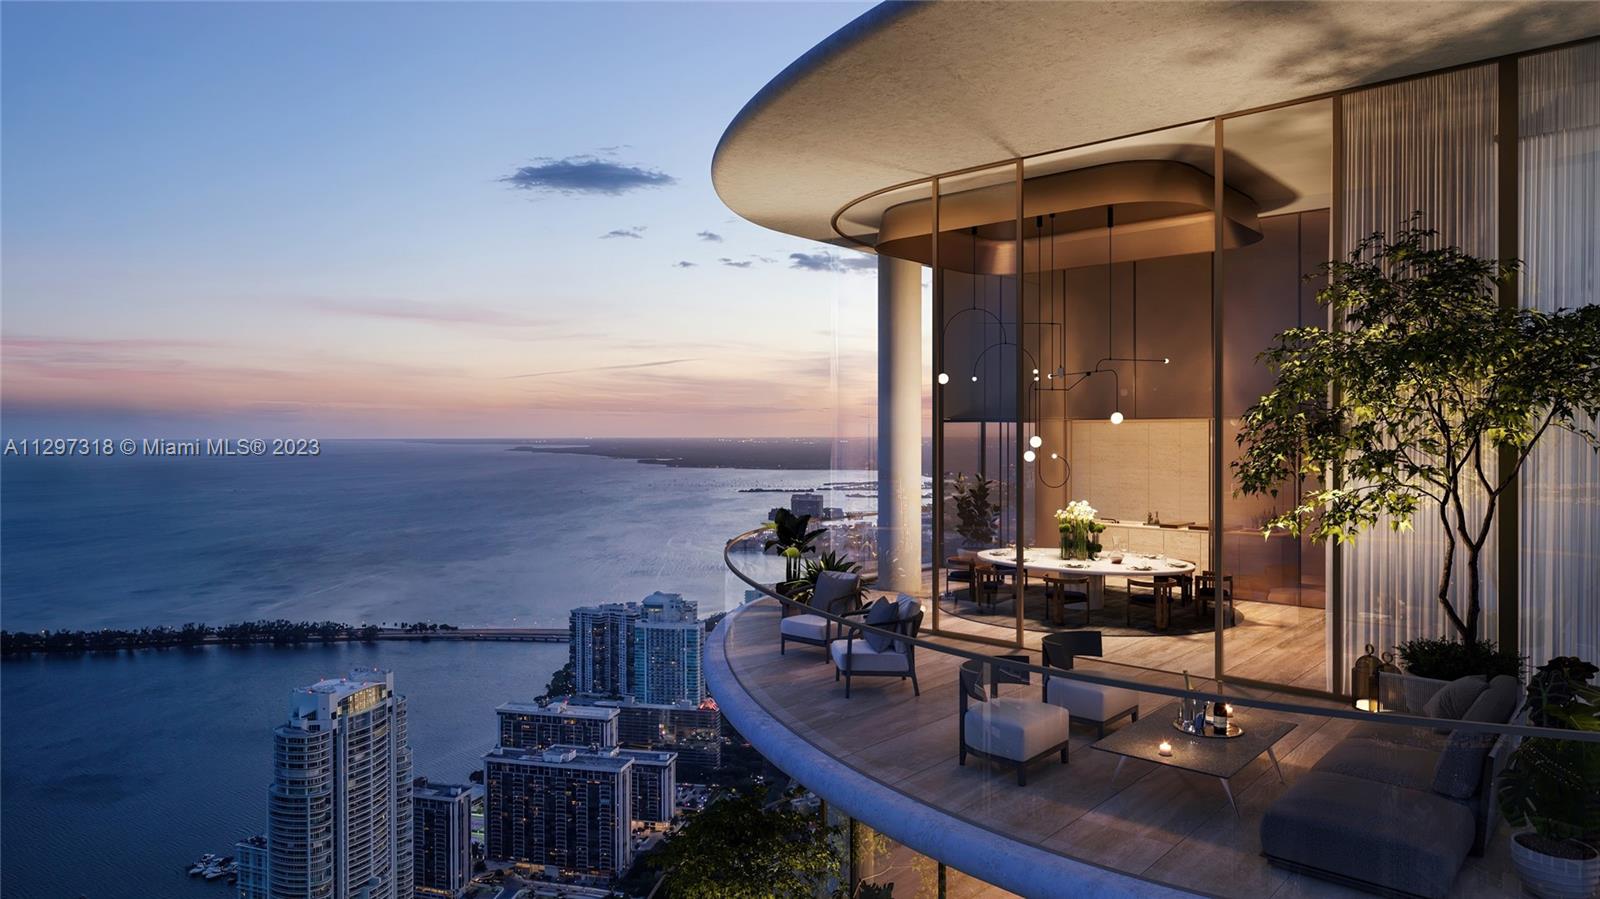 Introducing an elegant 2-Bedroom+Den home at The Residences at 1428 Brickell: An exquisite collection of only 189 residences designed as a private sanctuary within the quintessential Miami skyline. This 1,796-SF residence features a thoughtfully designed floorplan by ACPV Architects; and includes 11-foot ceilings, an Arclinea kitchen, a deep sunrise terrace w/summer kitchen, a private elevator foyer with 2 elevators, and Citterio-designed signature pieces throughout. Enjoy 80,000 SF of amenities, including a rooftop pool, a two-story owners club, and an entire floor dedicated to health & wellness. The Resort Deck offers a full-floor family-focused space including a pool with shallow wading area, poolside cabanas, an indoor/outdoor children's learning center, cinema screening room & more.